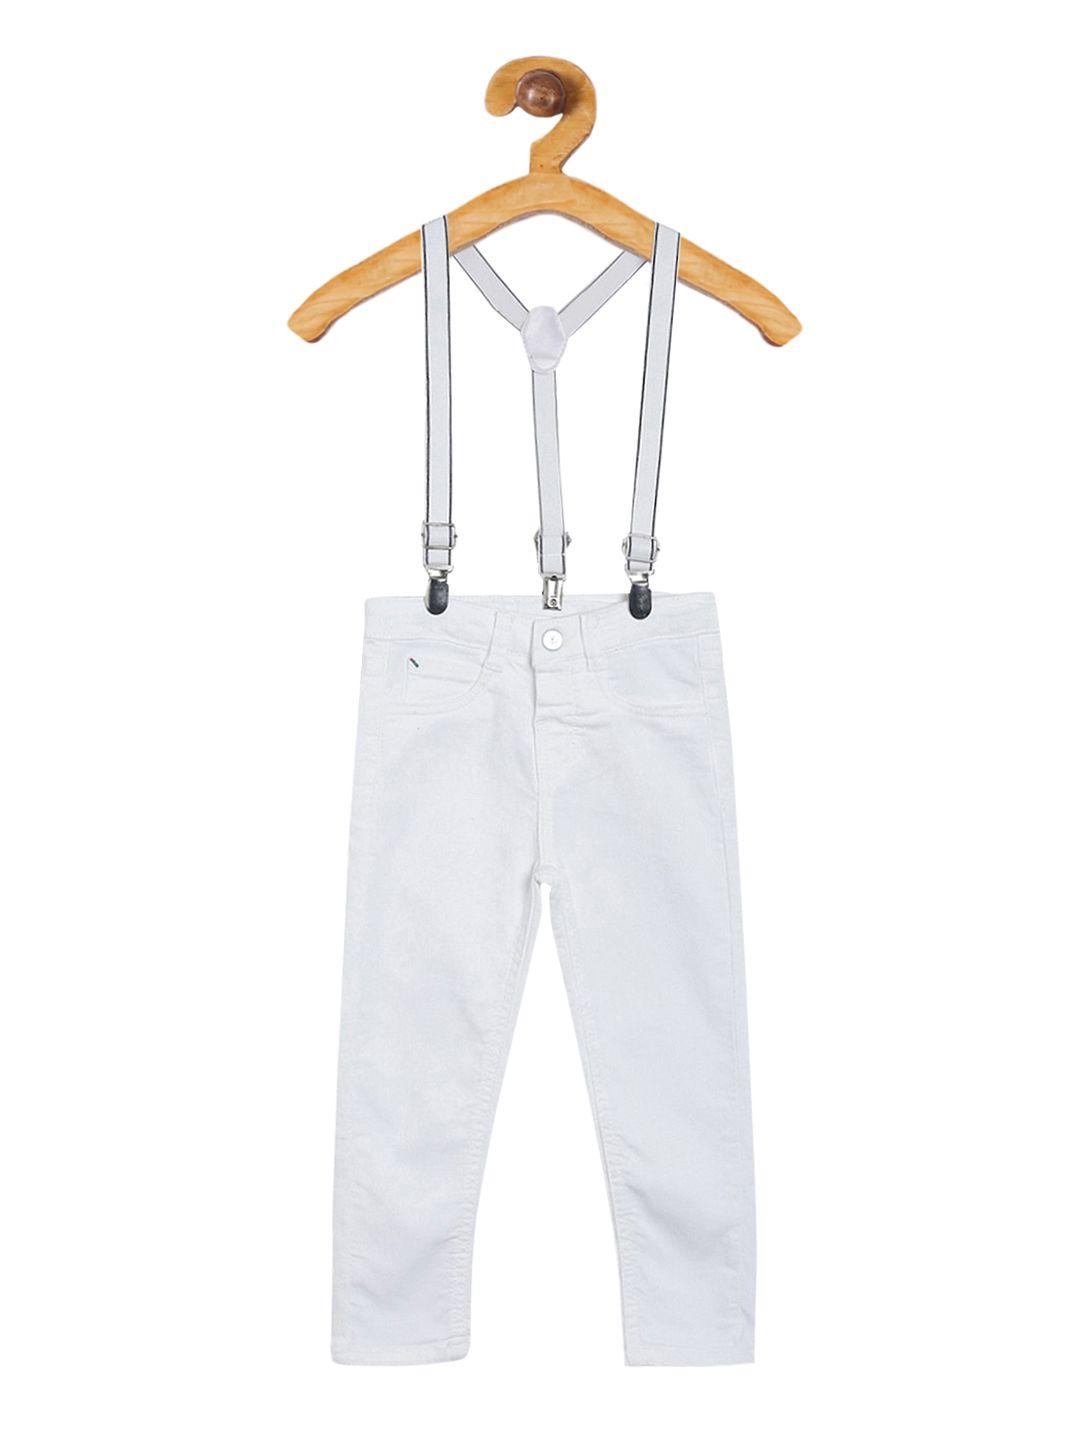 tales-&-stories-boys-white-regular-fit-solid-regular-trousers